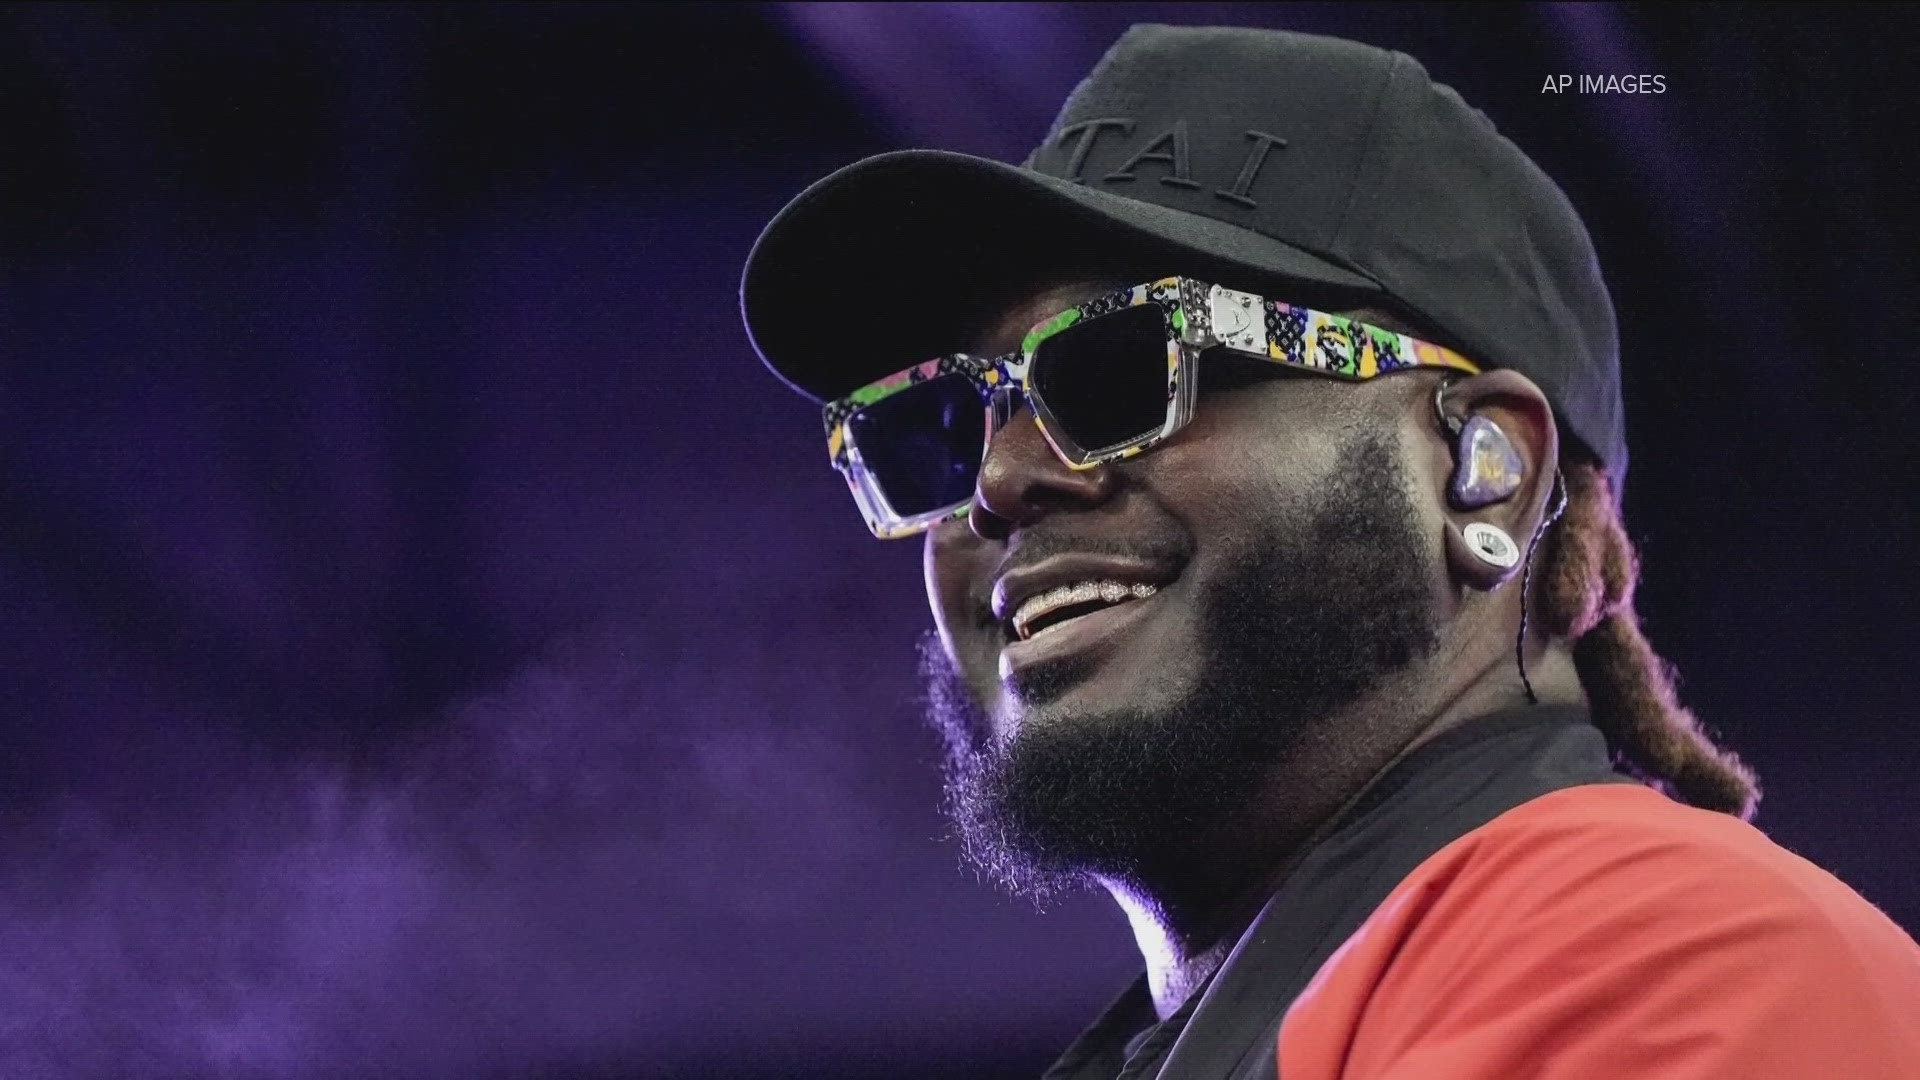 Rapper and songwriter T-Pain, whose real name is Faheem Najm, was the victim of an early morning hit-and-run crash at a Roswell intersection on Monday, police said.